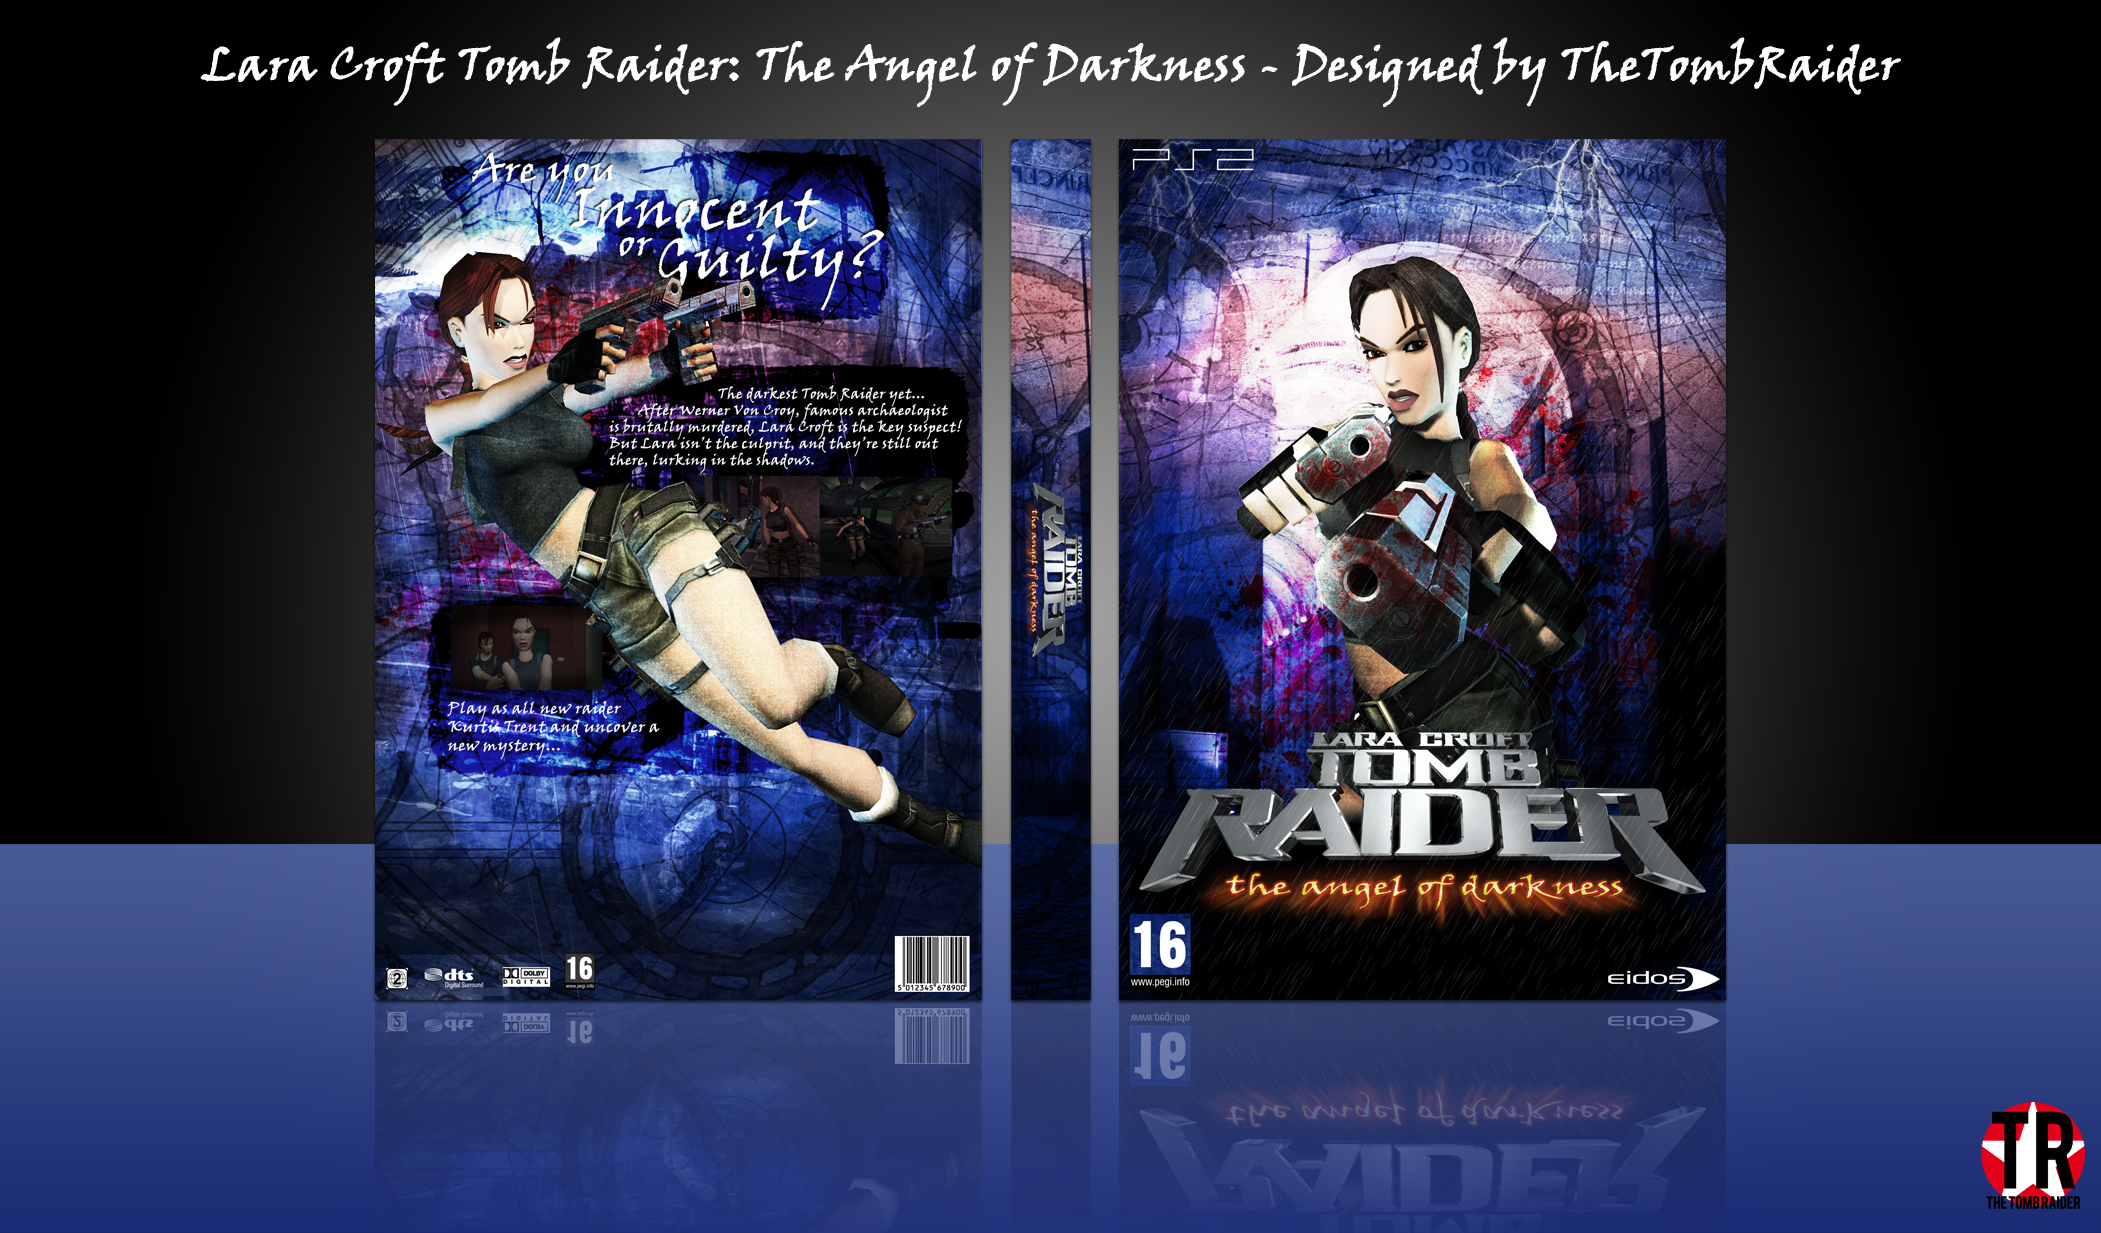 tomb raider angel of darkness for